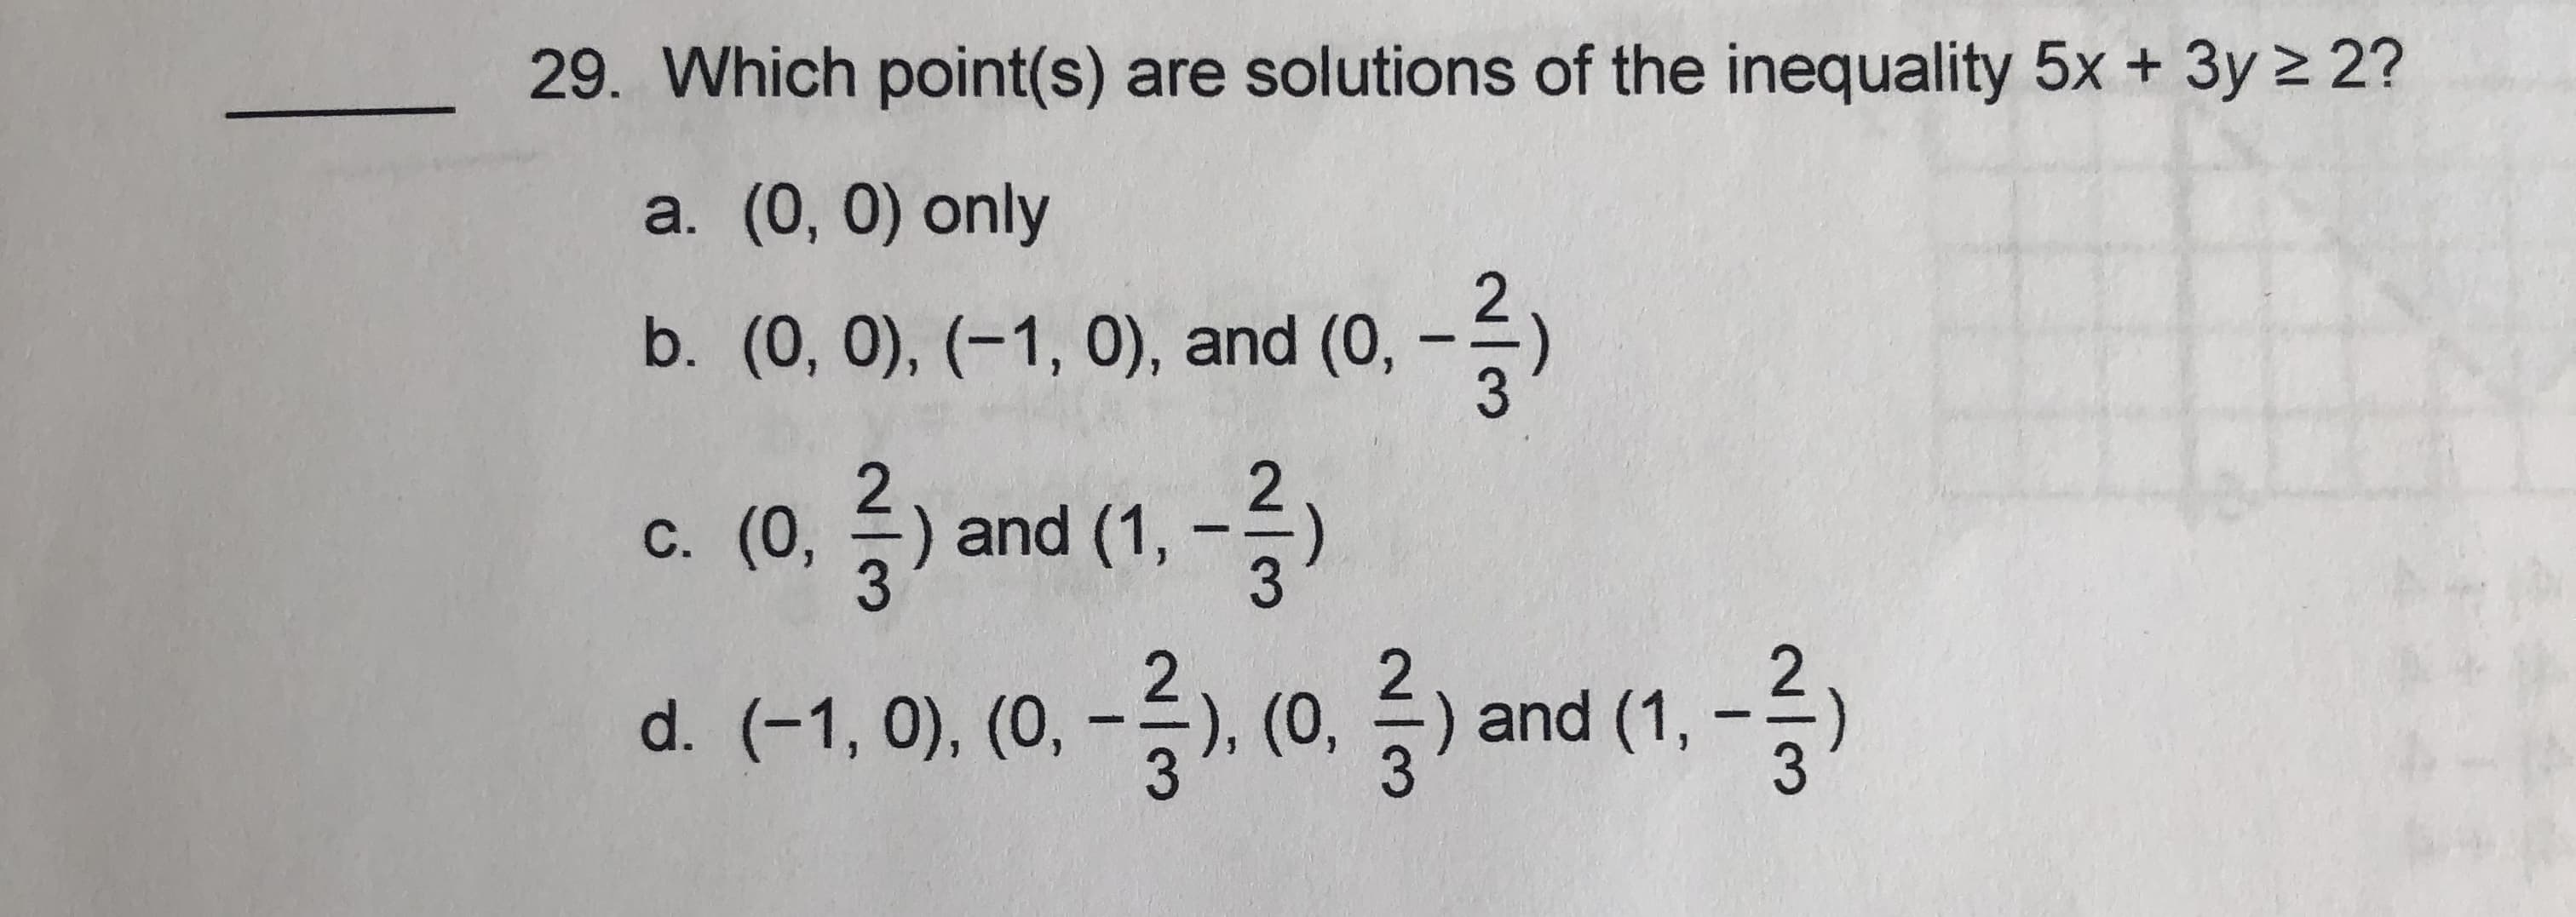 29. Which point(s) are solutions of the inequality 5x + 3y 2 2?
a. (0, 0) only
b. (0, 0), (-1, 0), and (0, -)
c. (0, 즐) and (1,-)
d. (-1,0), (0,-2) (0, 글)
С. (0,
-승), (0,
) and
and (1, -
승
